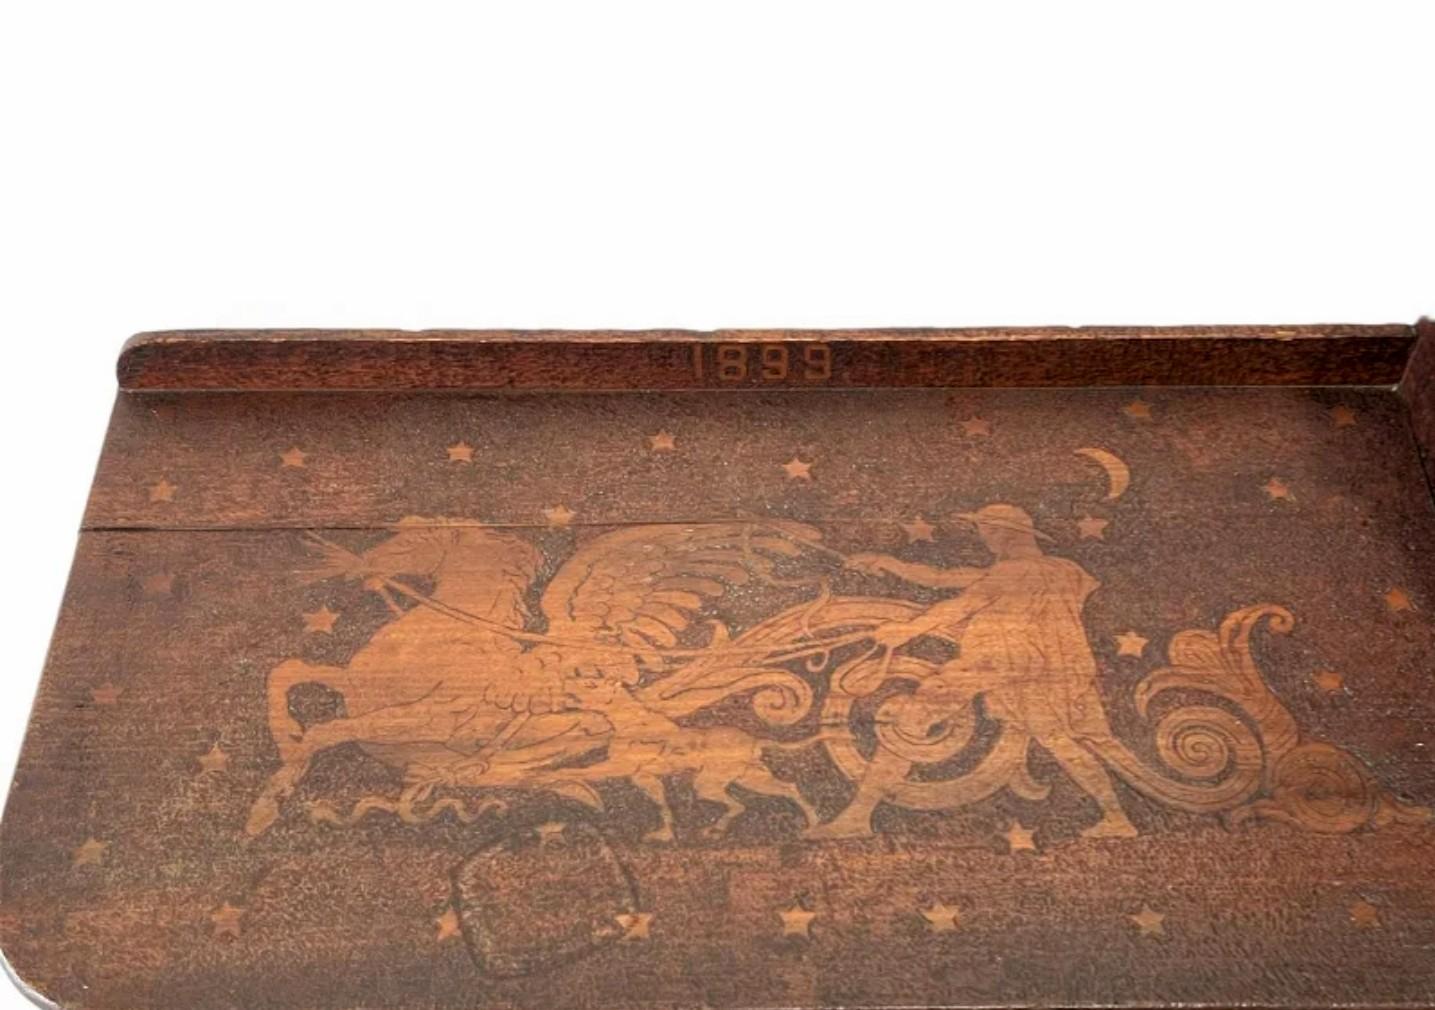 A rare, one-of-a-kind antique American folk decorated desk with beautifully aged distressed patina found in Mt. Juliet, Tennessee. 

Hand-crafted in the Southern United States in the late 19th century, featuring elaborate hand carving and pyrography